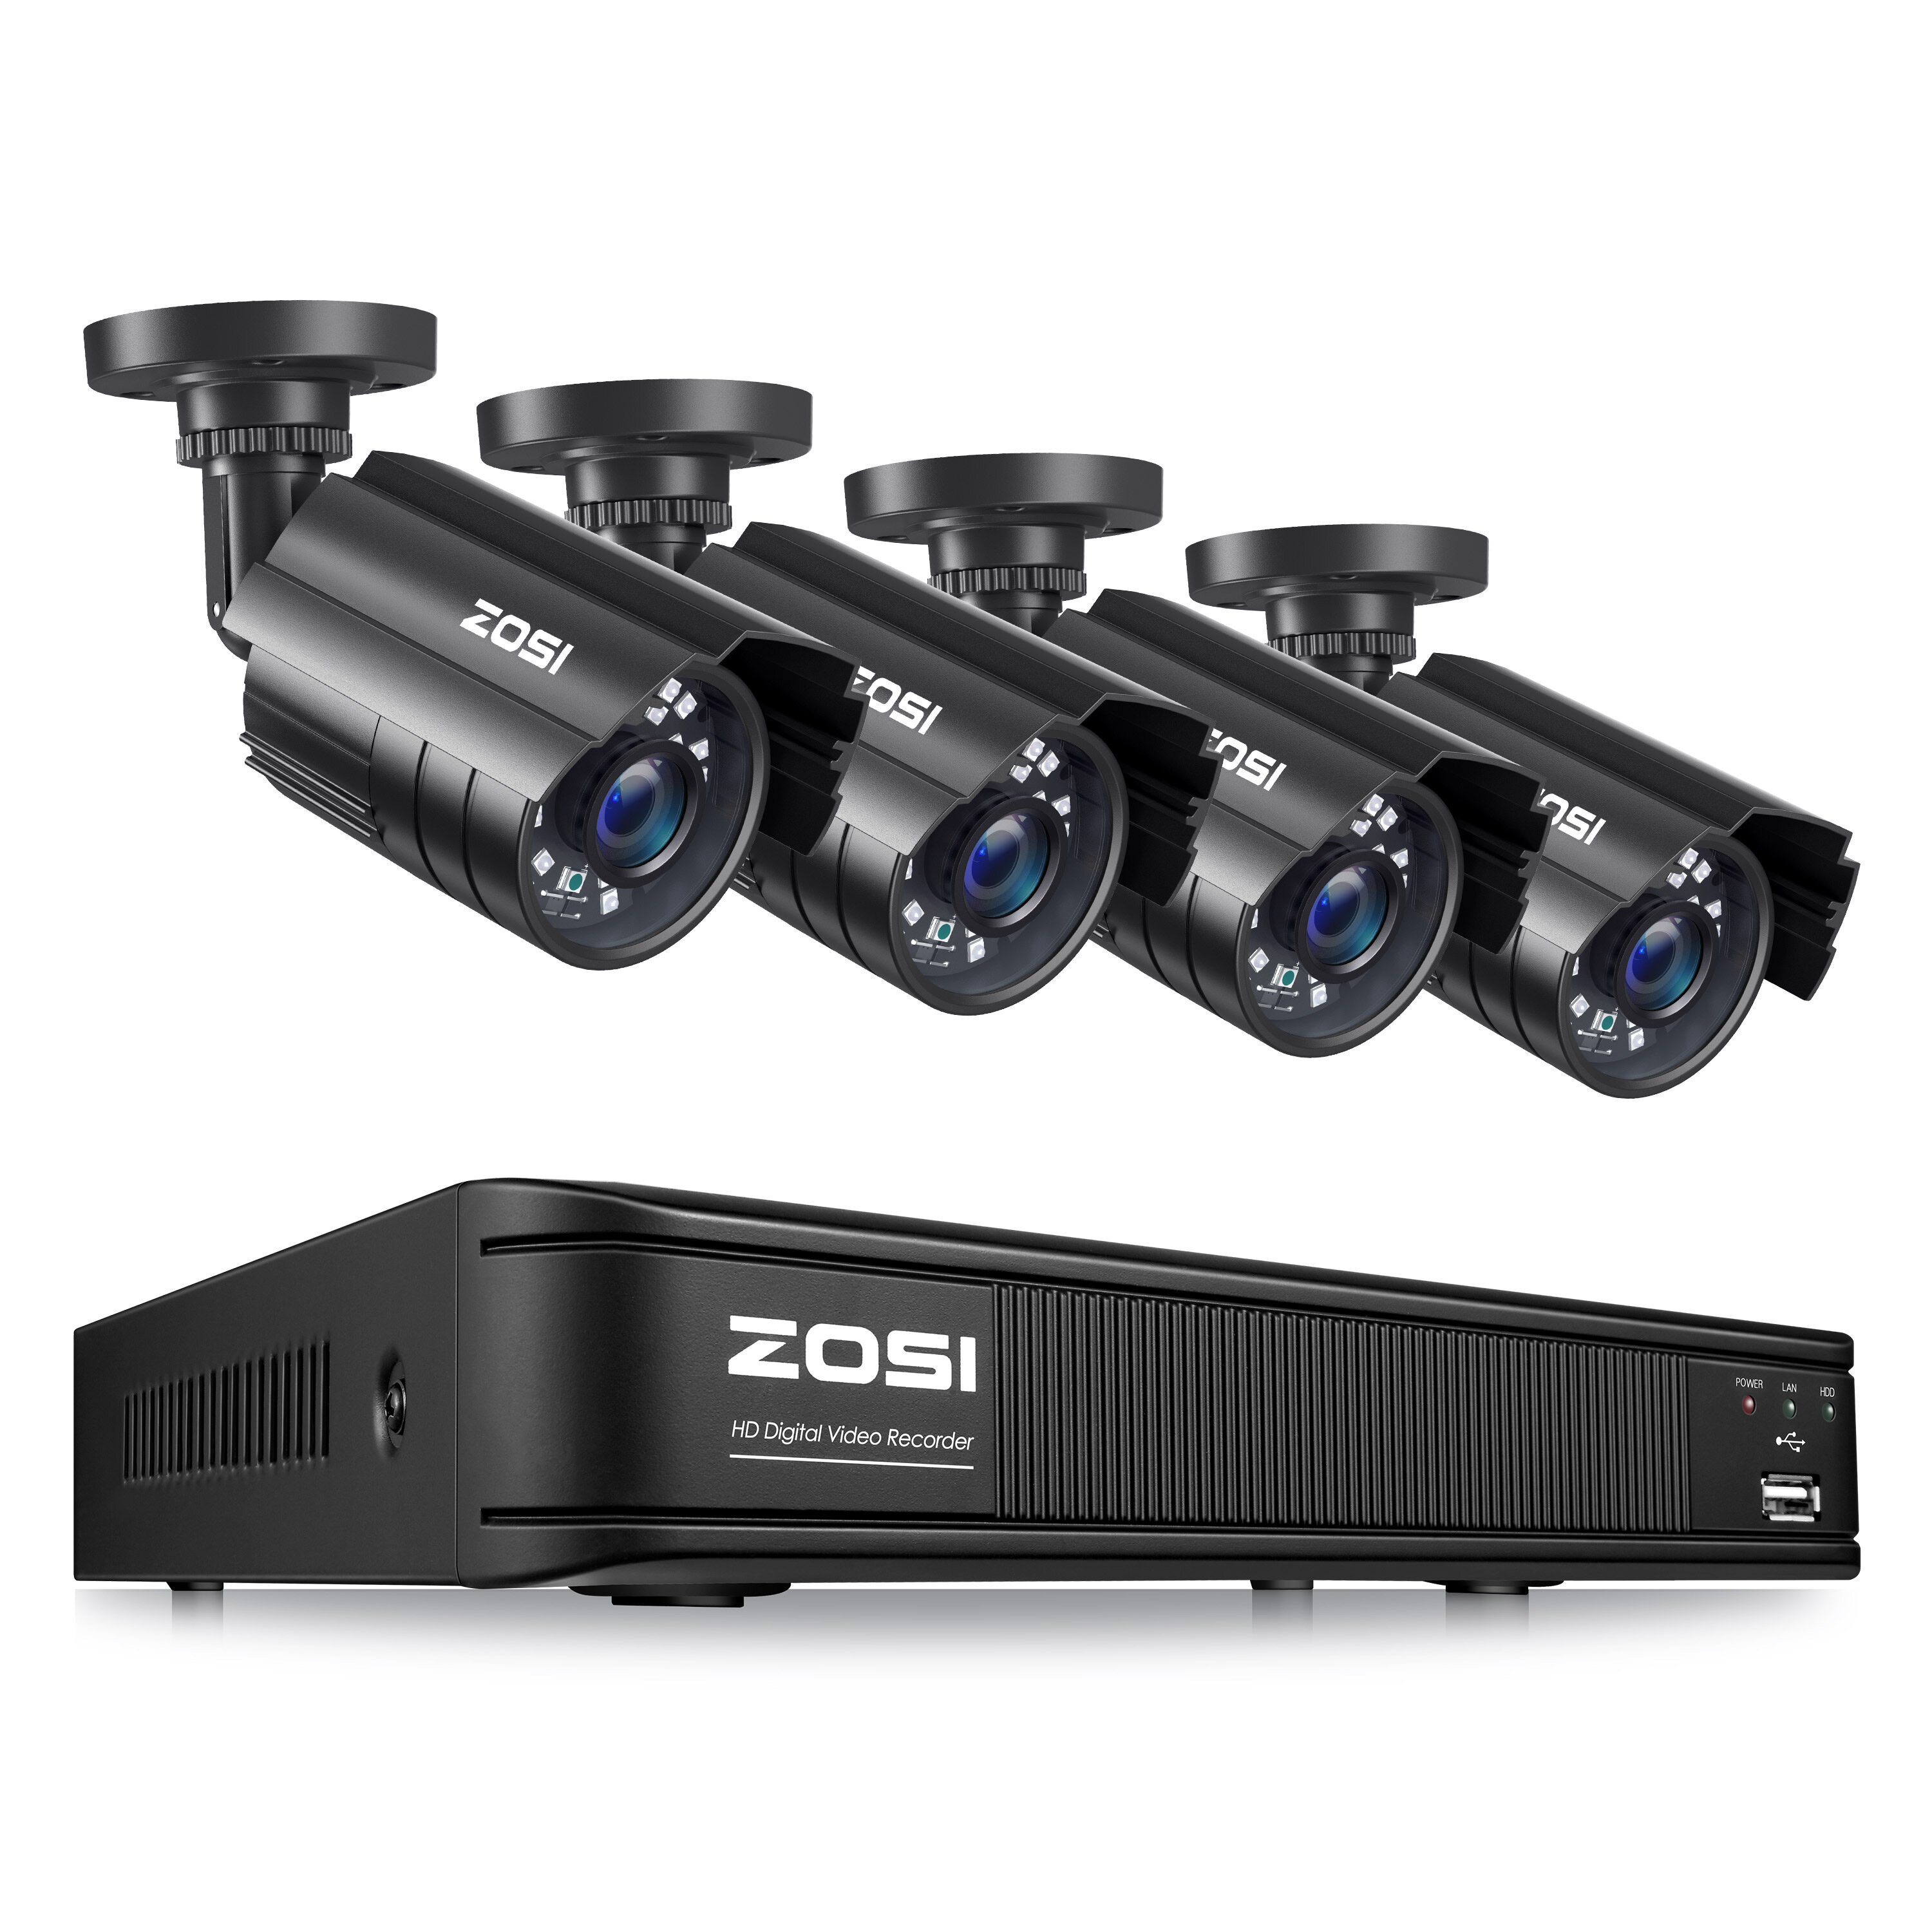 get zosi view app to connect with my zosi dvr